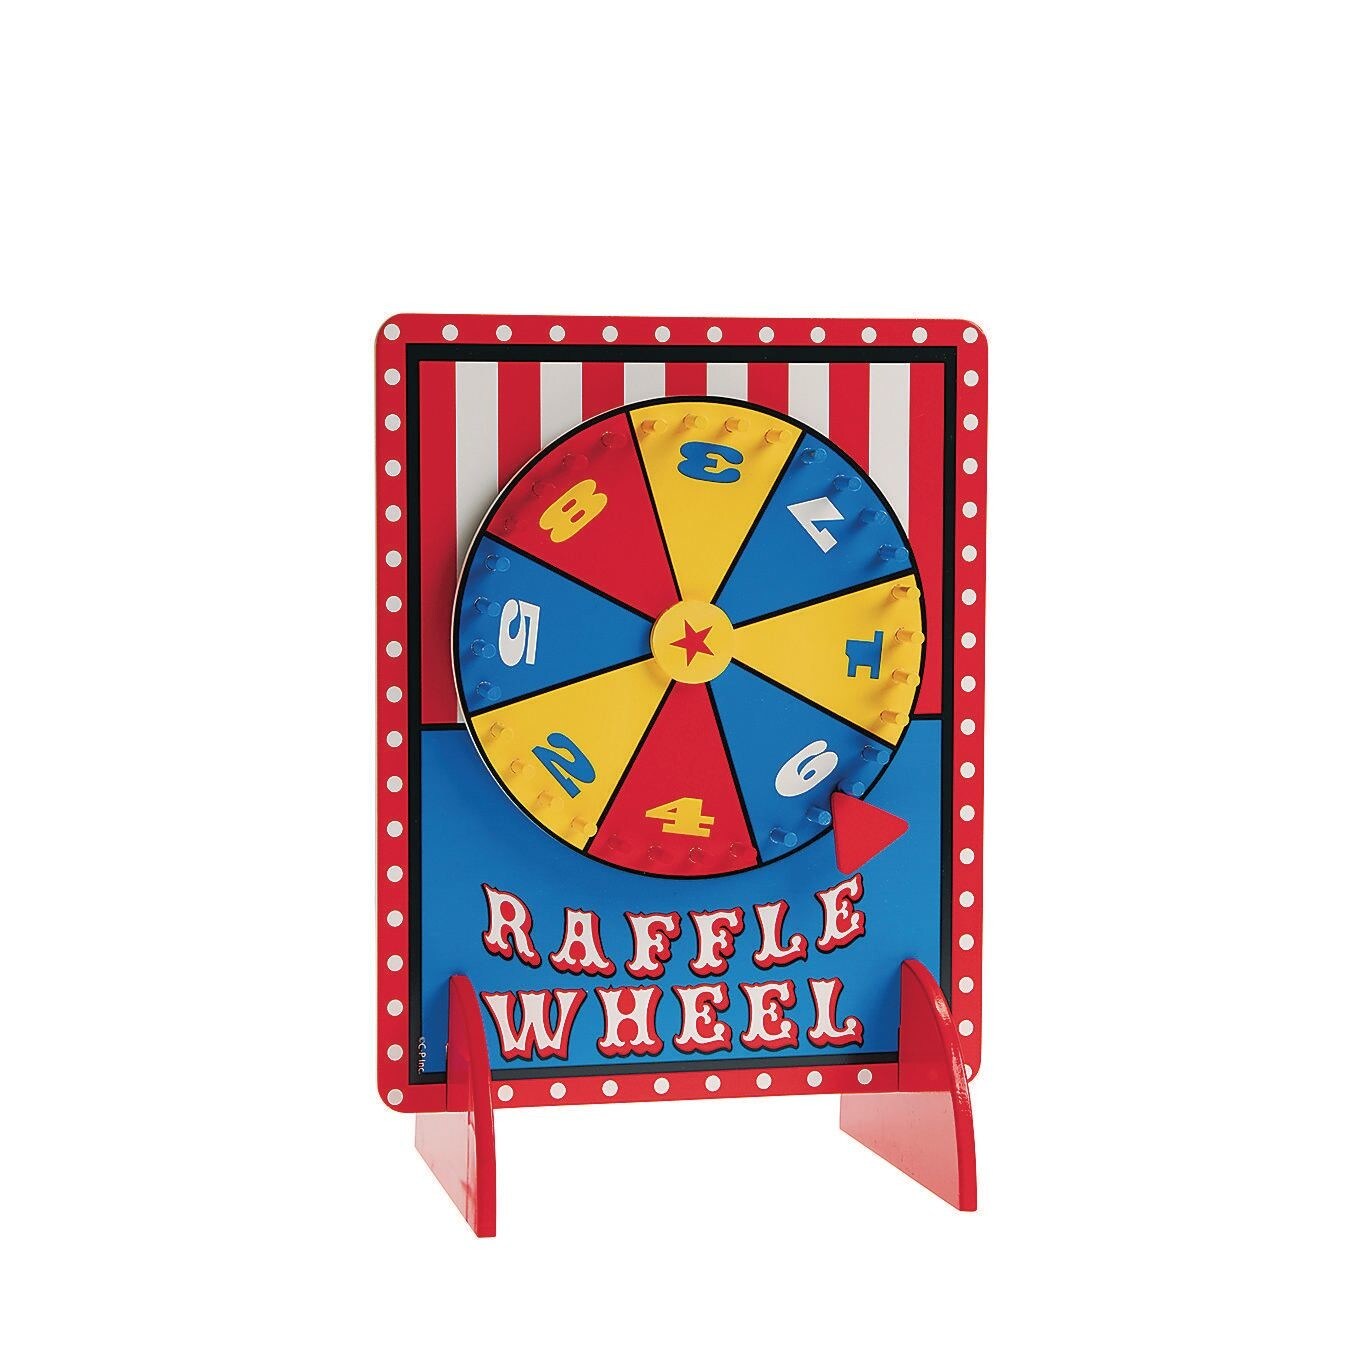 Spinning Wheel Personalized Stamp